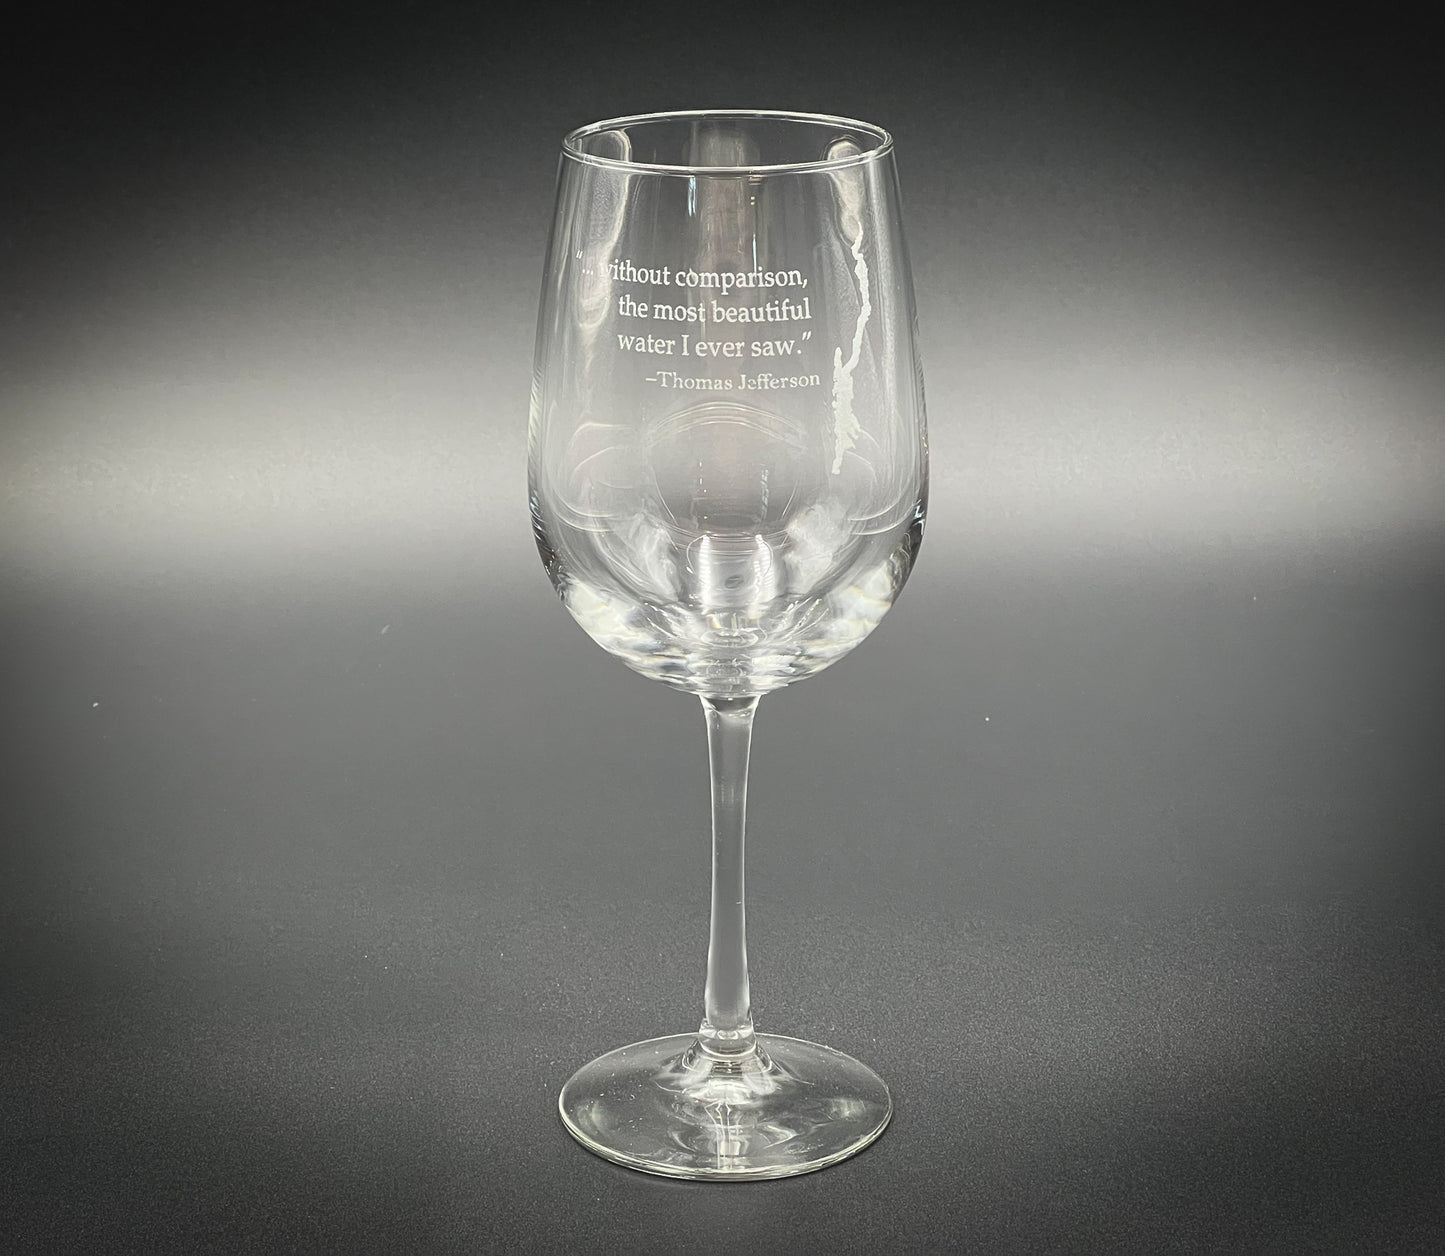 Lake George with Thomas Jefferson Quote - 18.5 oz Stemmed Wine Glass